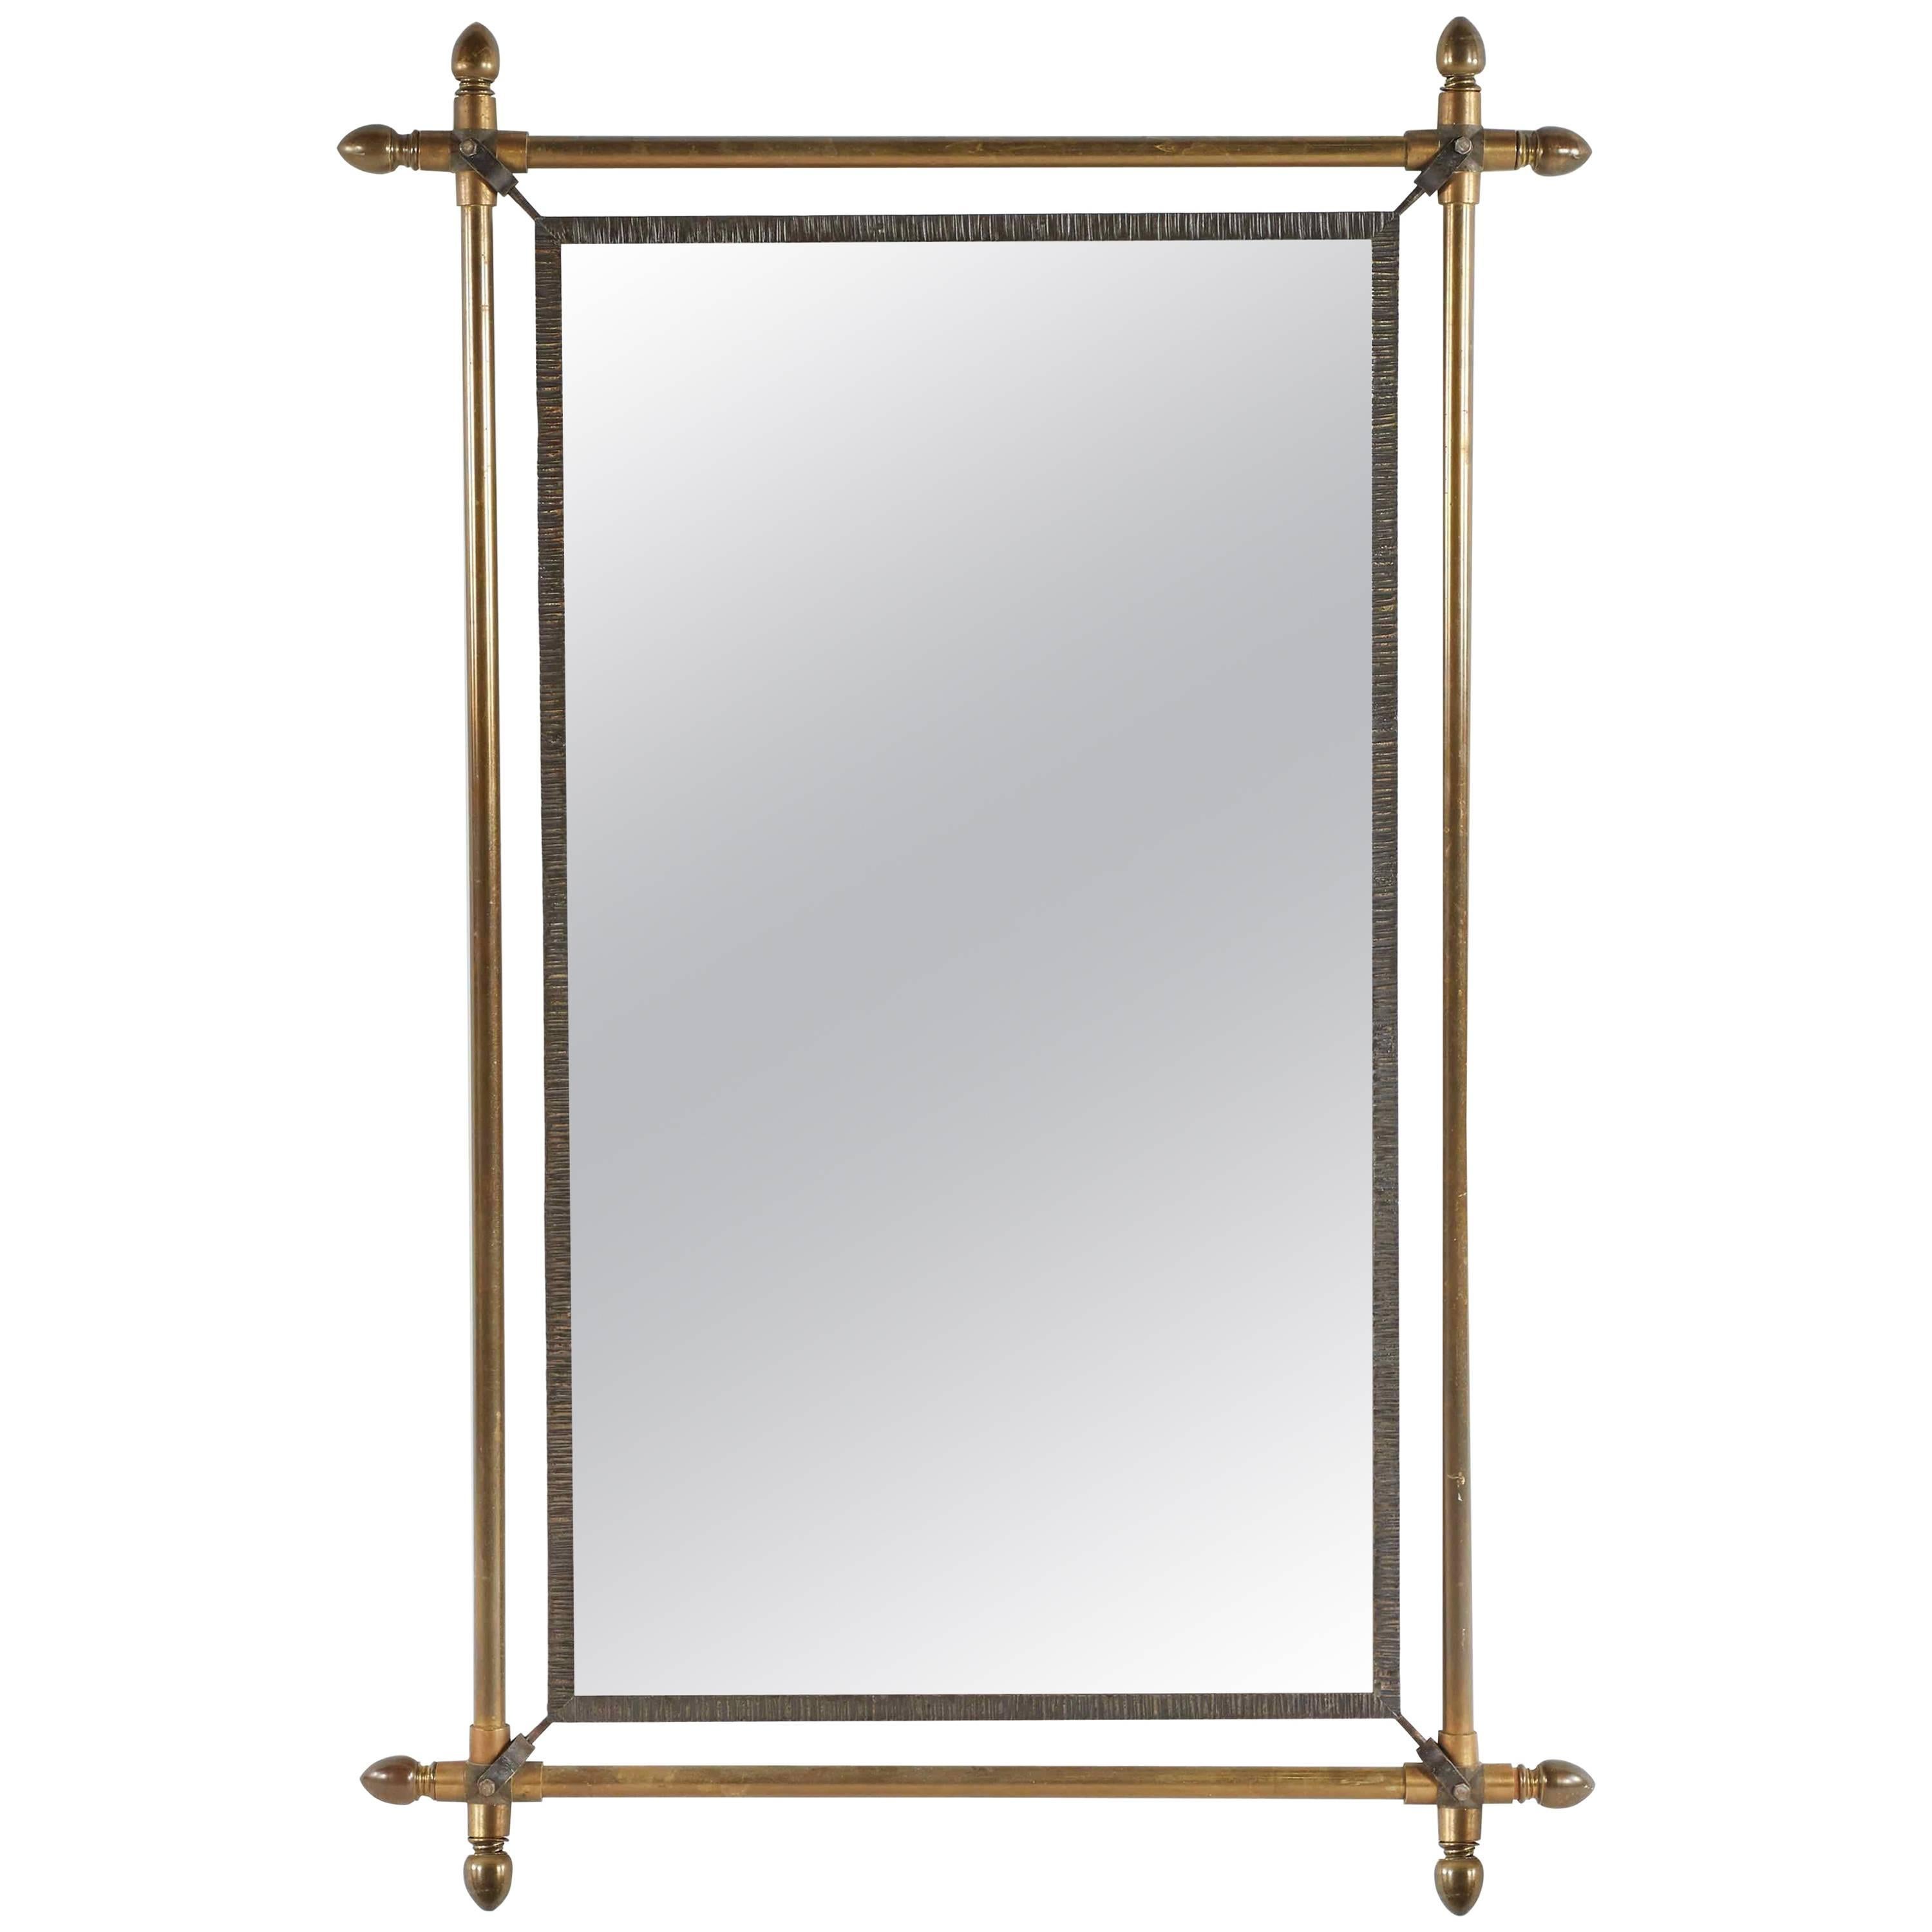 Large Metal and Brass Mirror from Late 19th Century France